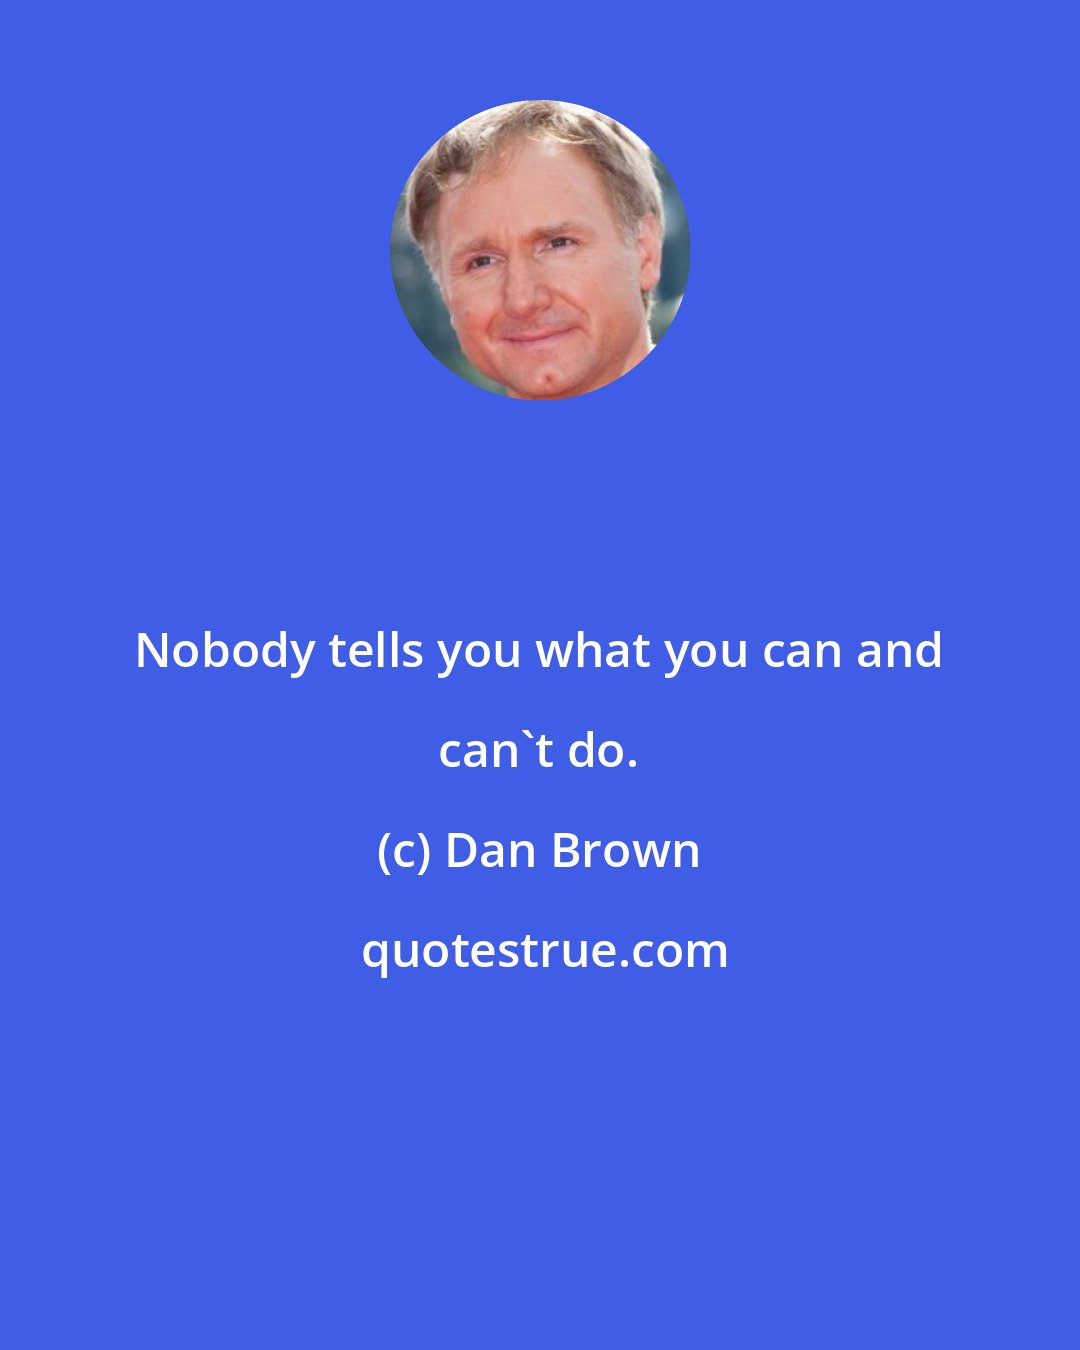 Dan Brown: Nobody tells you what you can and can't do.